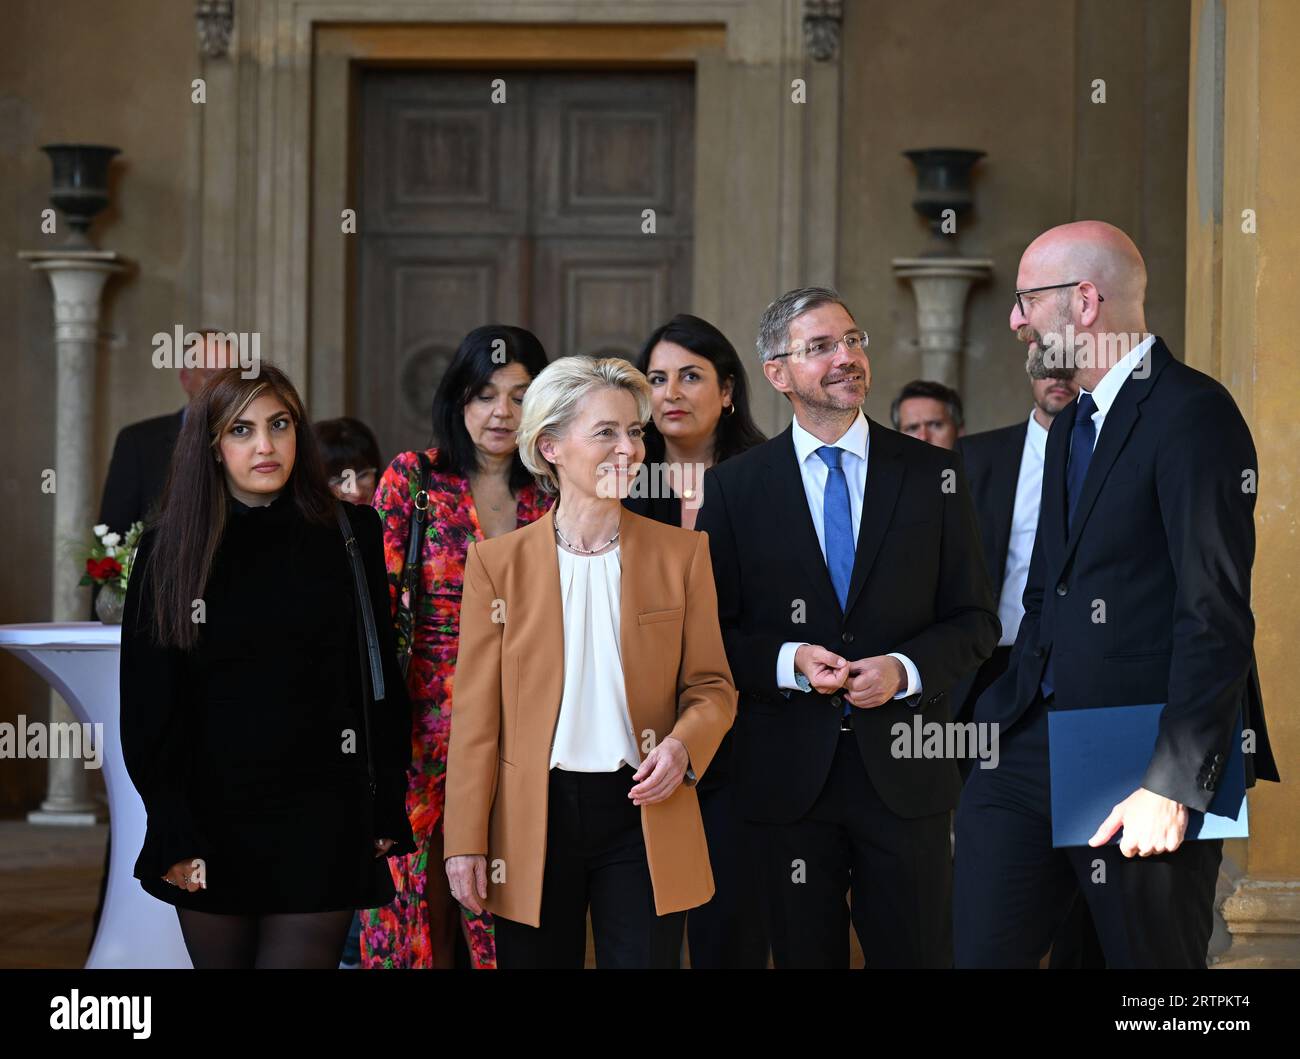 14 September 2023, Brandenburg, Potsdam: Shima Babaei (l-r), Iranian women's rights activist, Ursula von der Leyen, President of the European Commission, and Mike Schubert (SPD), Mayor of the City of Potsdam, are welcomed to the M100 Medie Award ceremony by Moritz van Dülmen (r), Managing Director of Kulturprojekte Berlin GmbH, at the Orangiere Sanssouci. In the second row walk Jasmin Tabatabai (l-r), German-Iranian actress and musician, Mersedeh Shahinkar (hidden), Iranian activist, and Düzen Tekkal, human rights activist. The M100 Media Award has been presented since 2005 as part of the inte Stock Photo